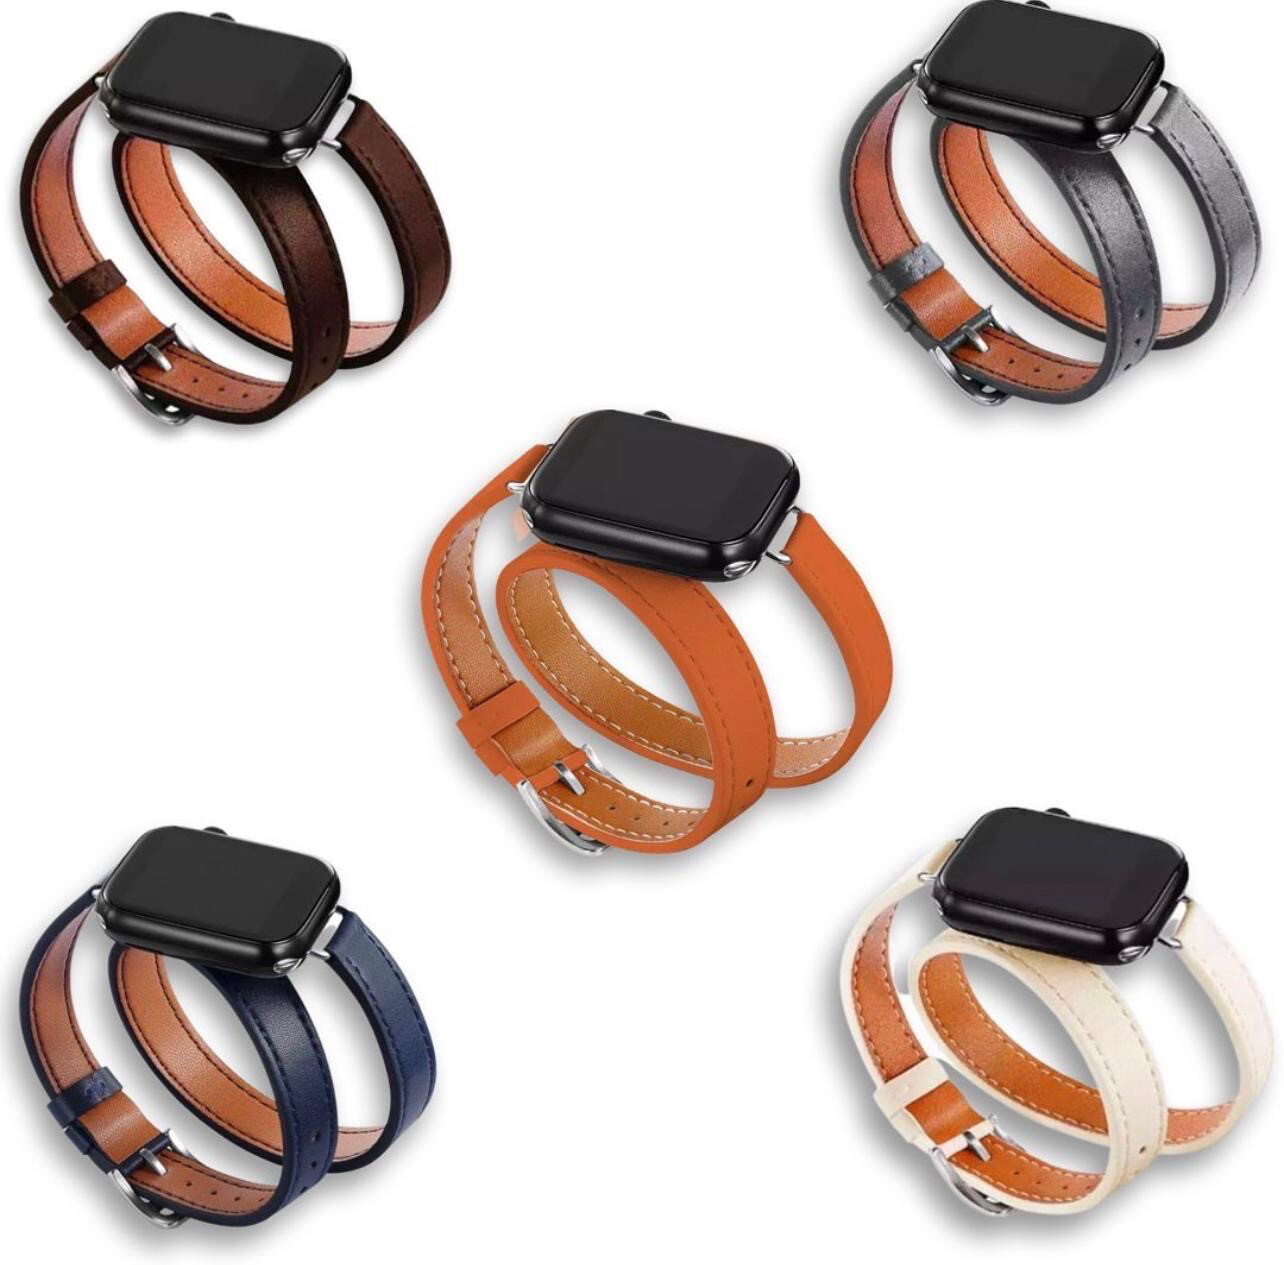 Women's Apple Watch strap design hermes  that wraps on the hands (slim) for all sizes, in distinctive colors